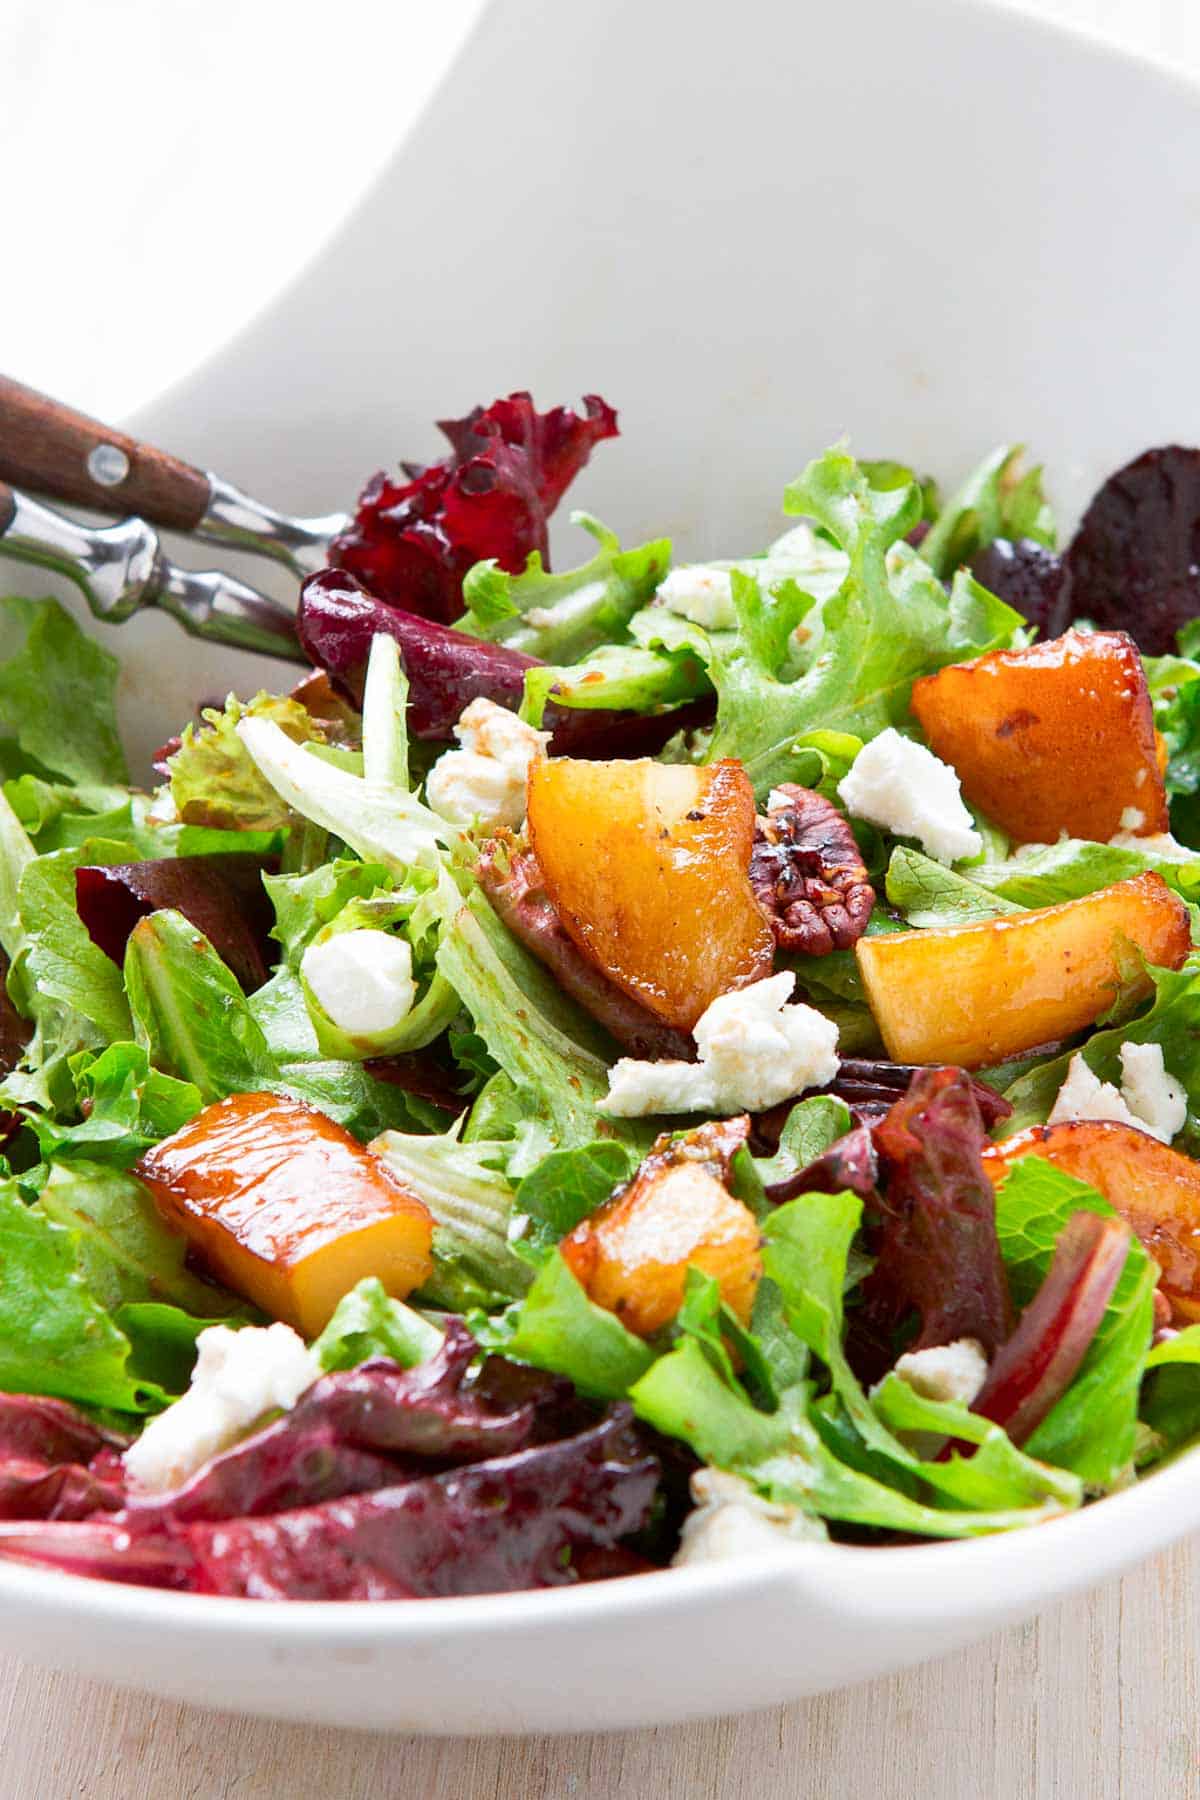 The ultimate fall salad! This maple pear and goat cheese salad gets rave reviews every time I serve it.  It pairs well with almost any main dish. | Recipes | Fall | Dressing | Autumn | Dressing vinaigrette 